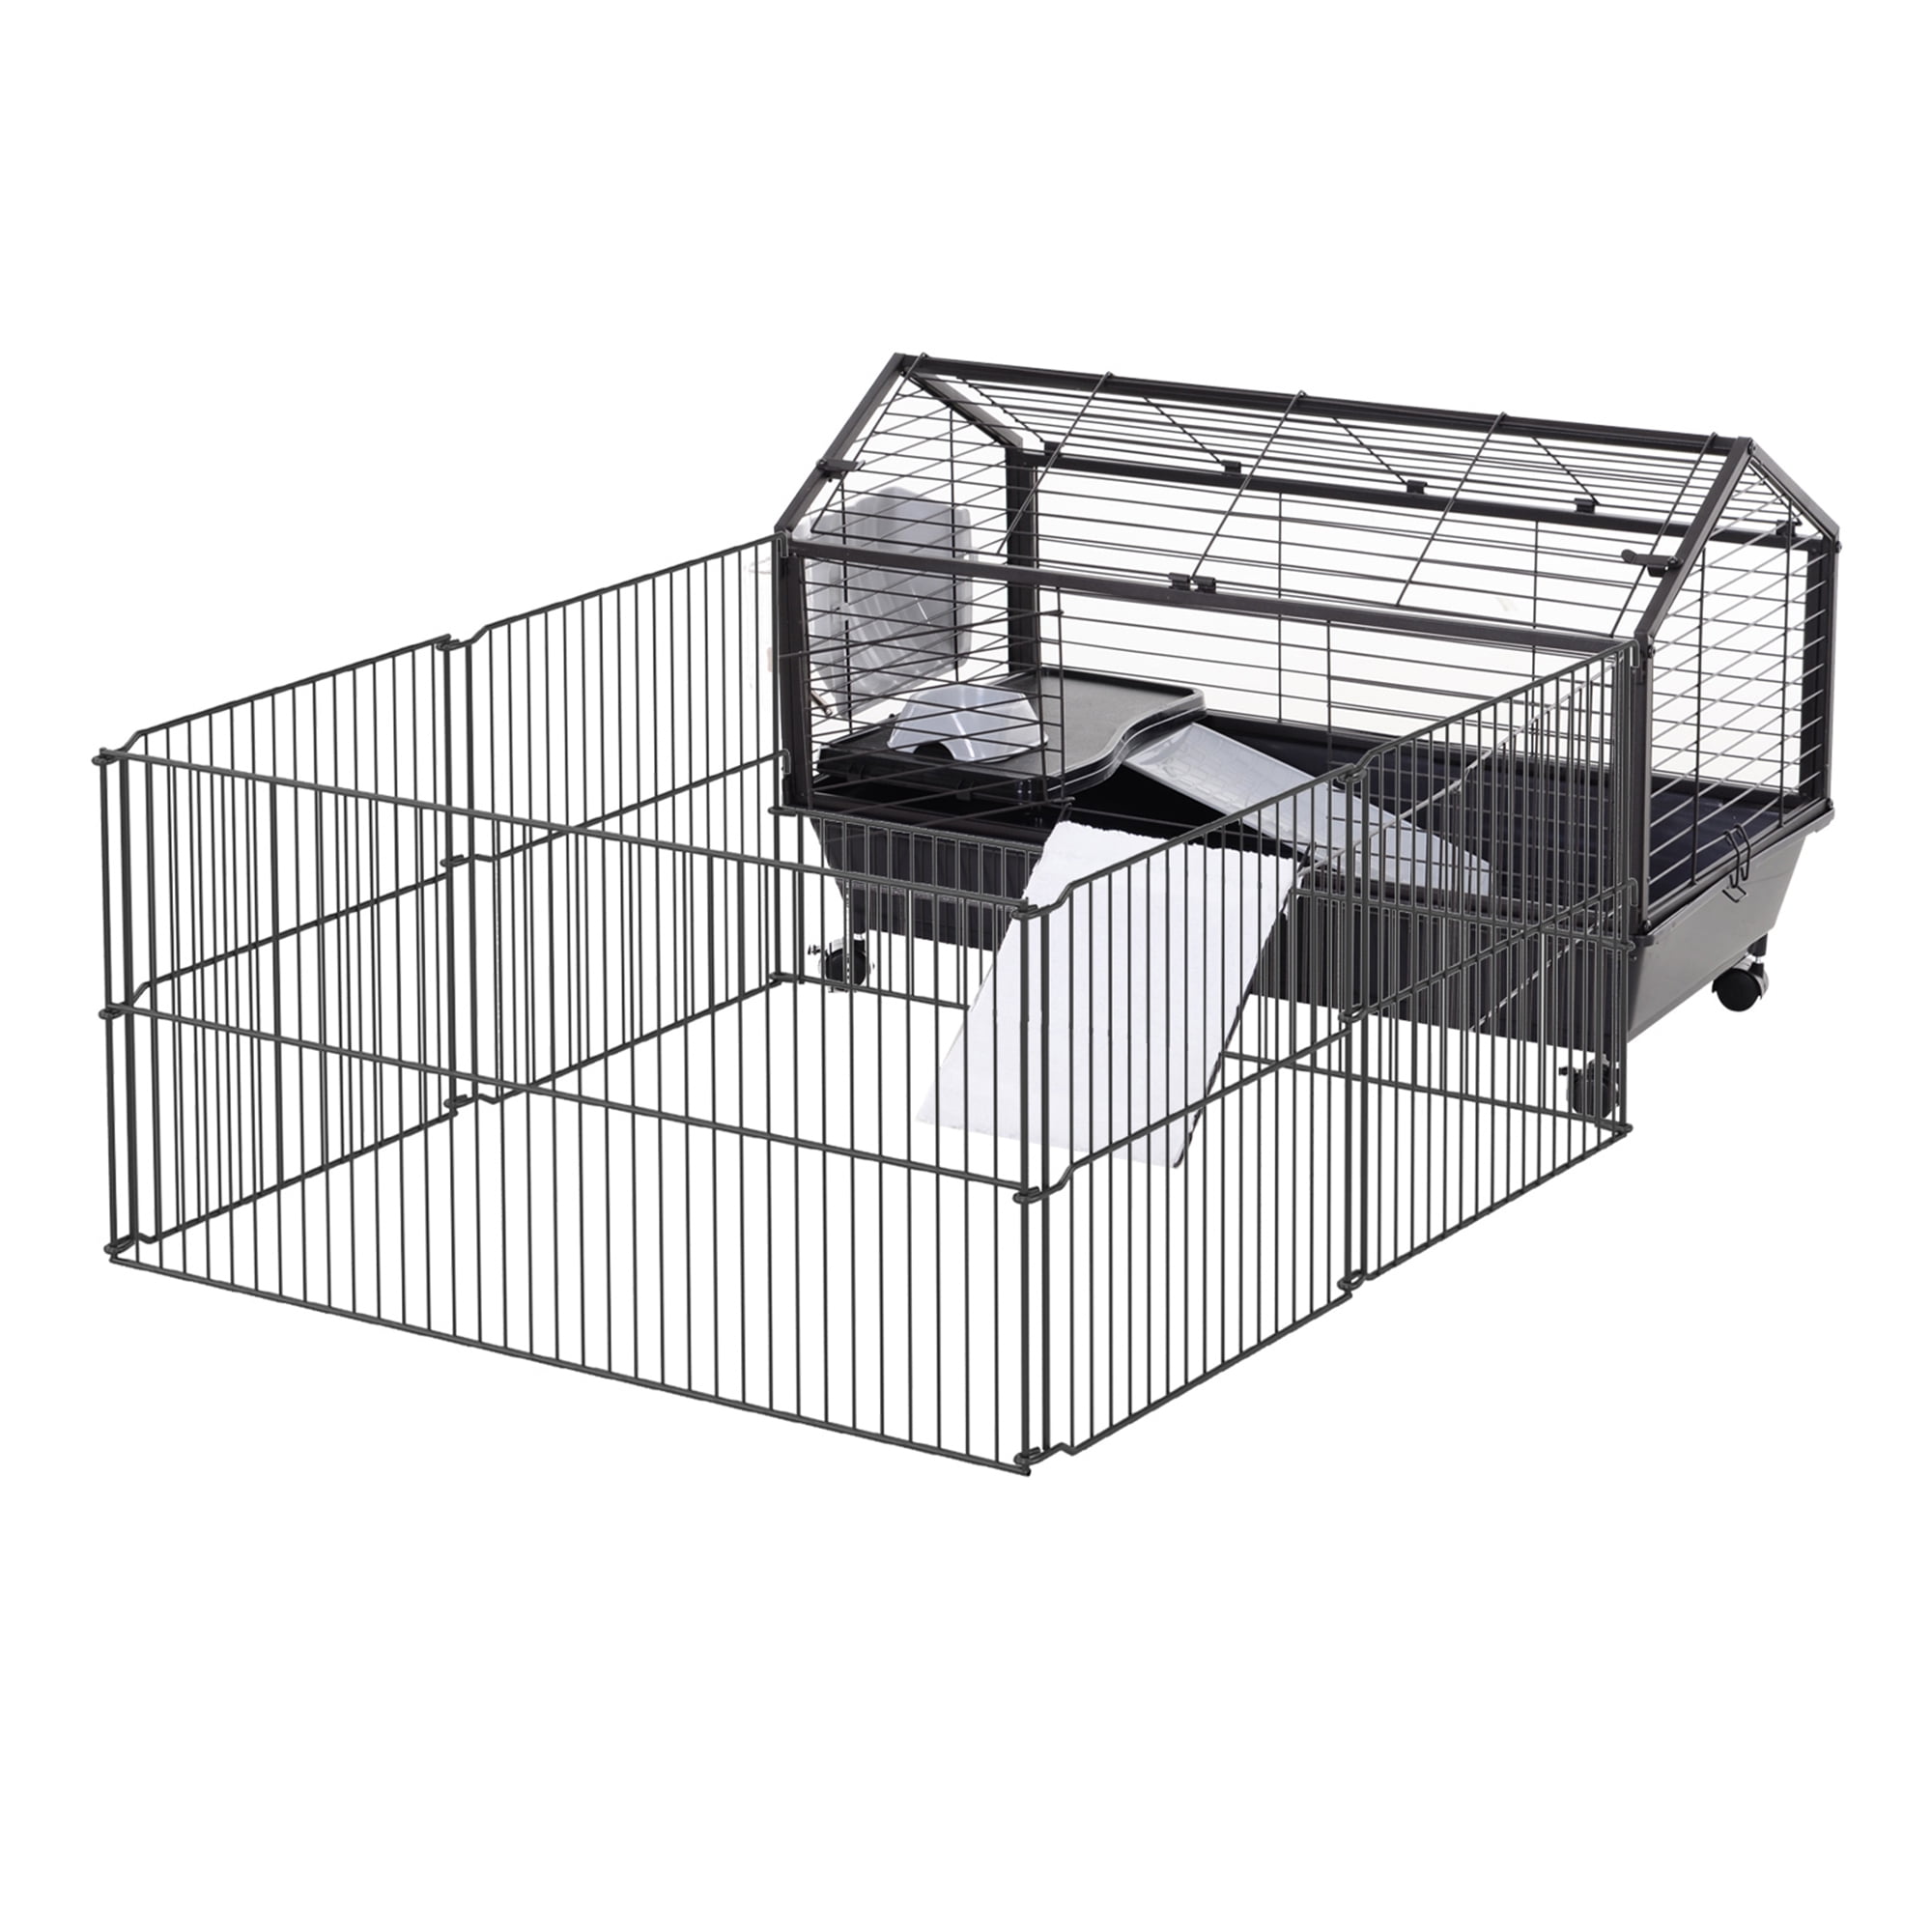 LARGE 42" x 28" Guinea Pig cage with 2nd level * NEW 